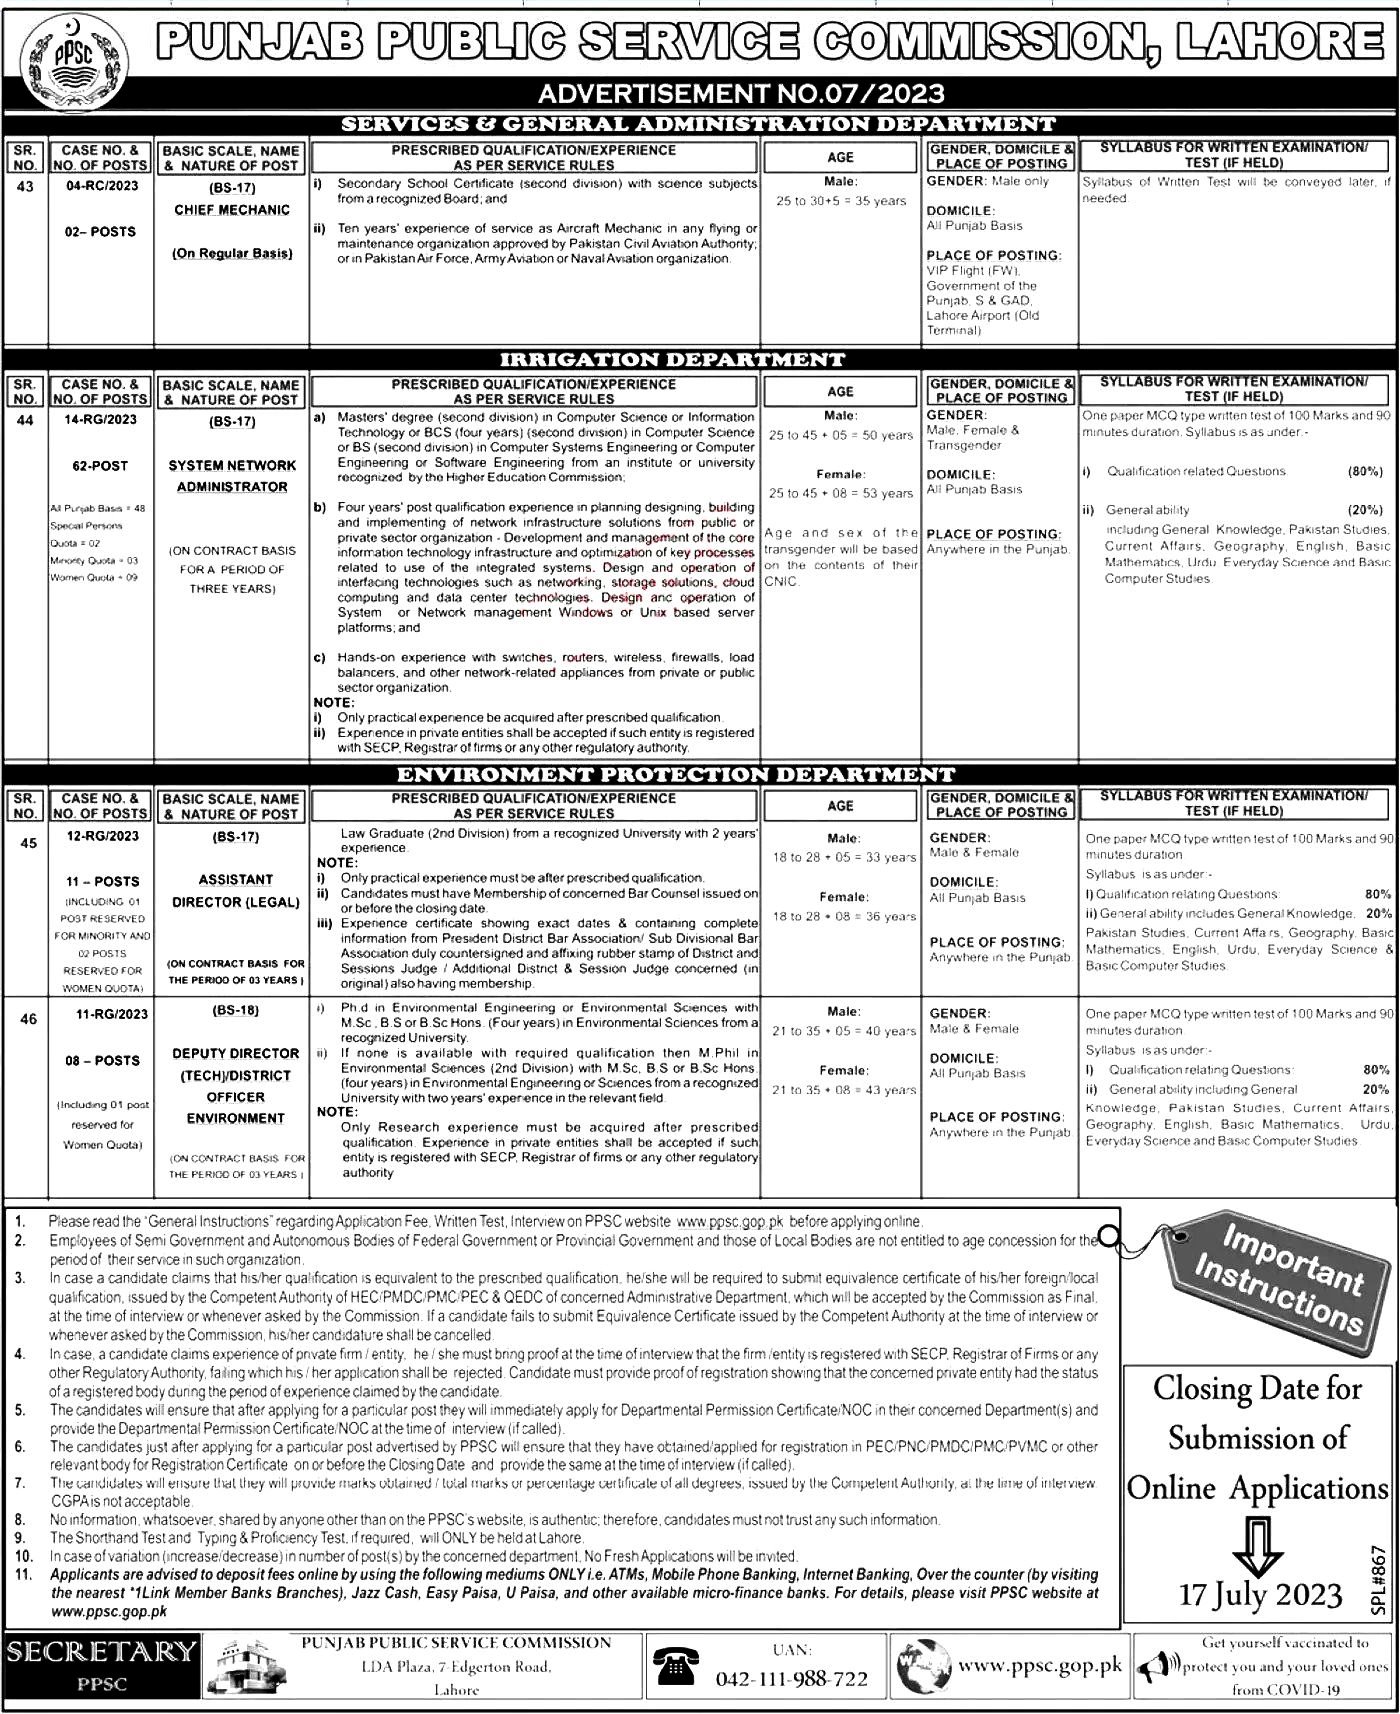 PPSC Jobs 2023 – PPSC Current Ad No. 7 | www.ppsc.gop.pk